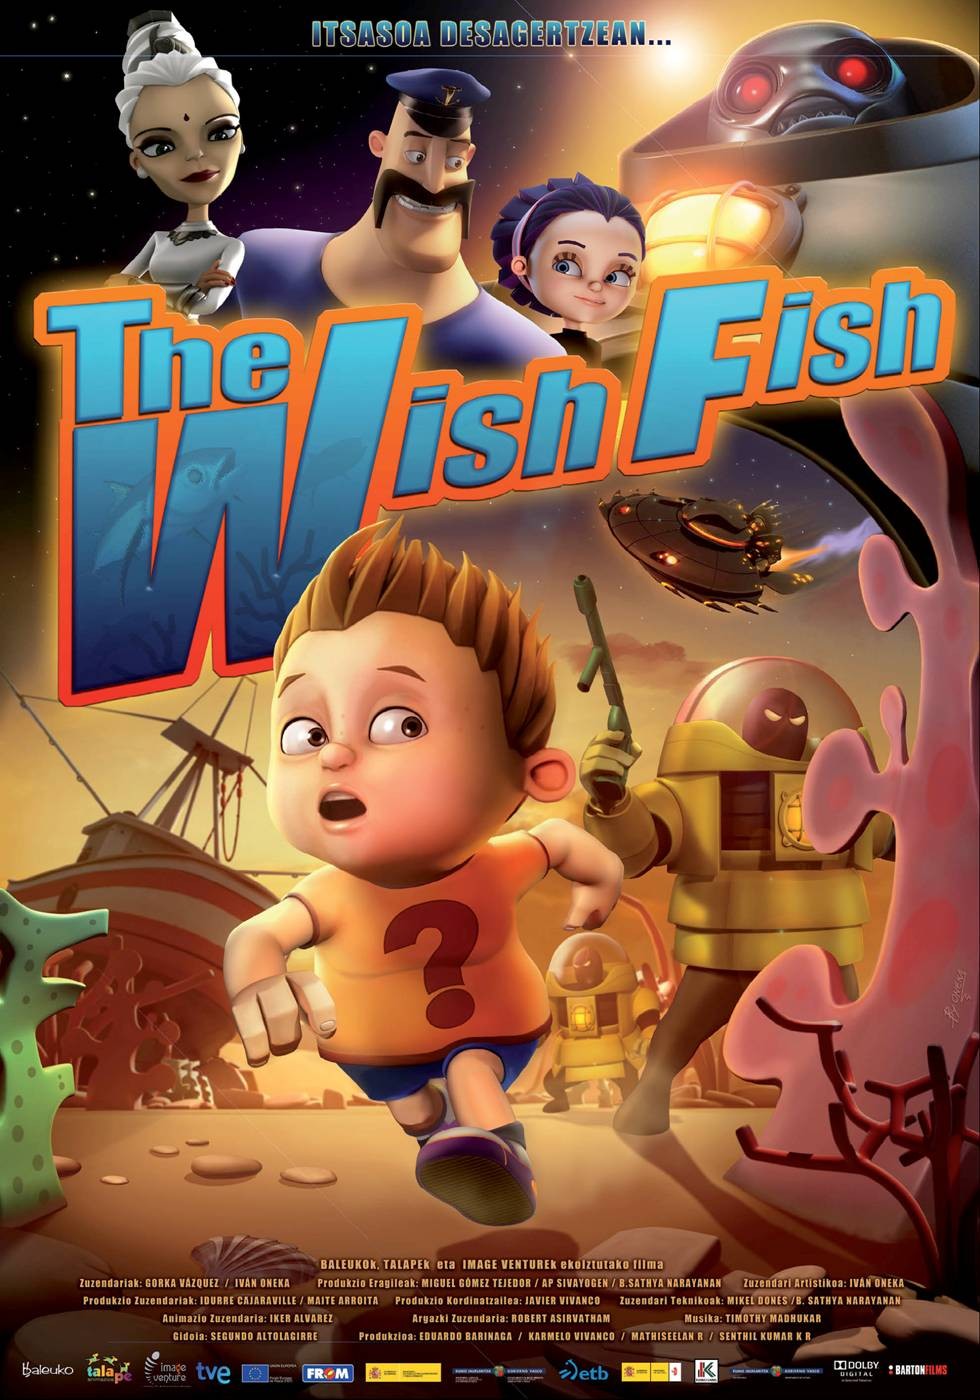 Extra Large Movie Poster Image for The Wish Fish 